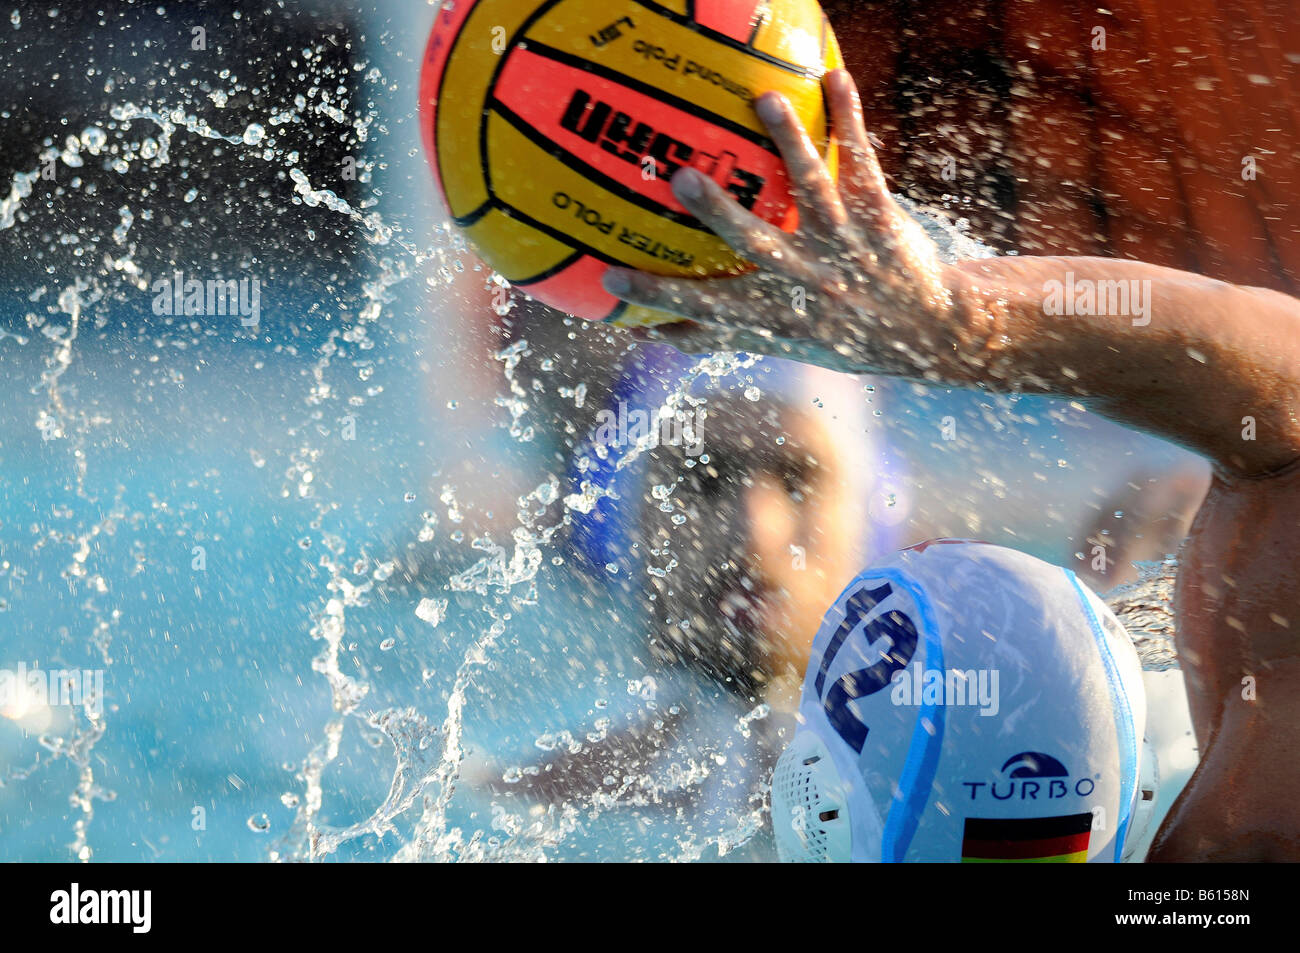 Water polo player, Soeren Mackeben about to throw the ball, National Championships, Germany versus Croatia in the outdoor pool Stock Photo